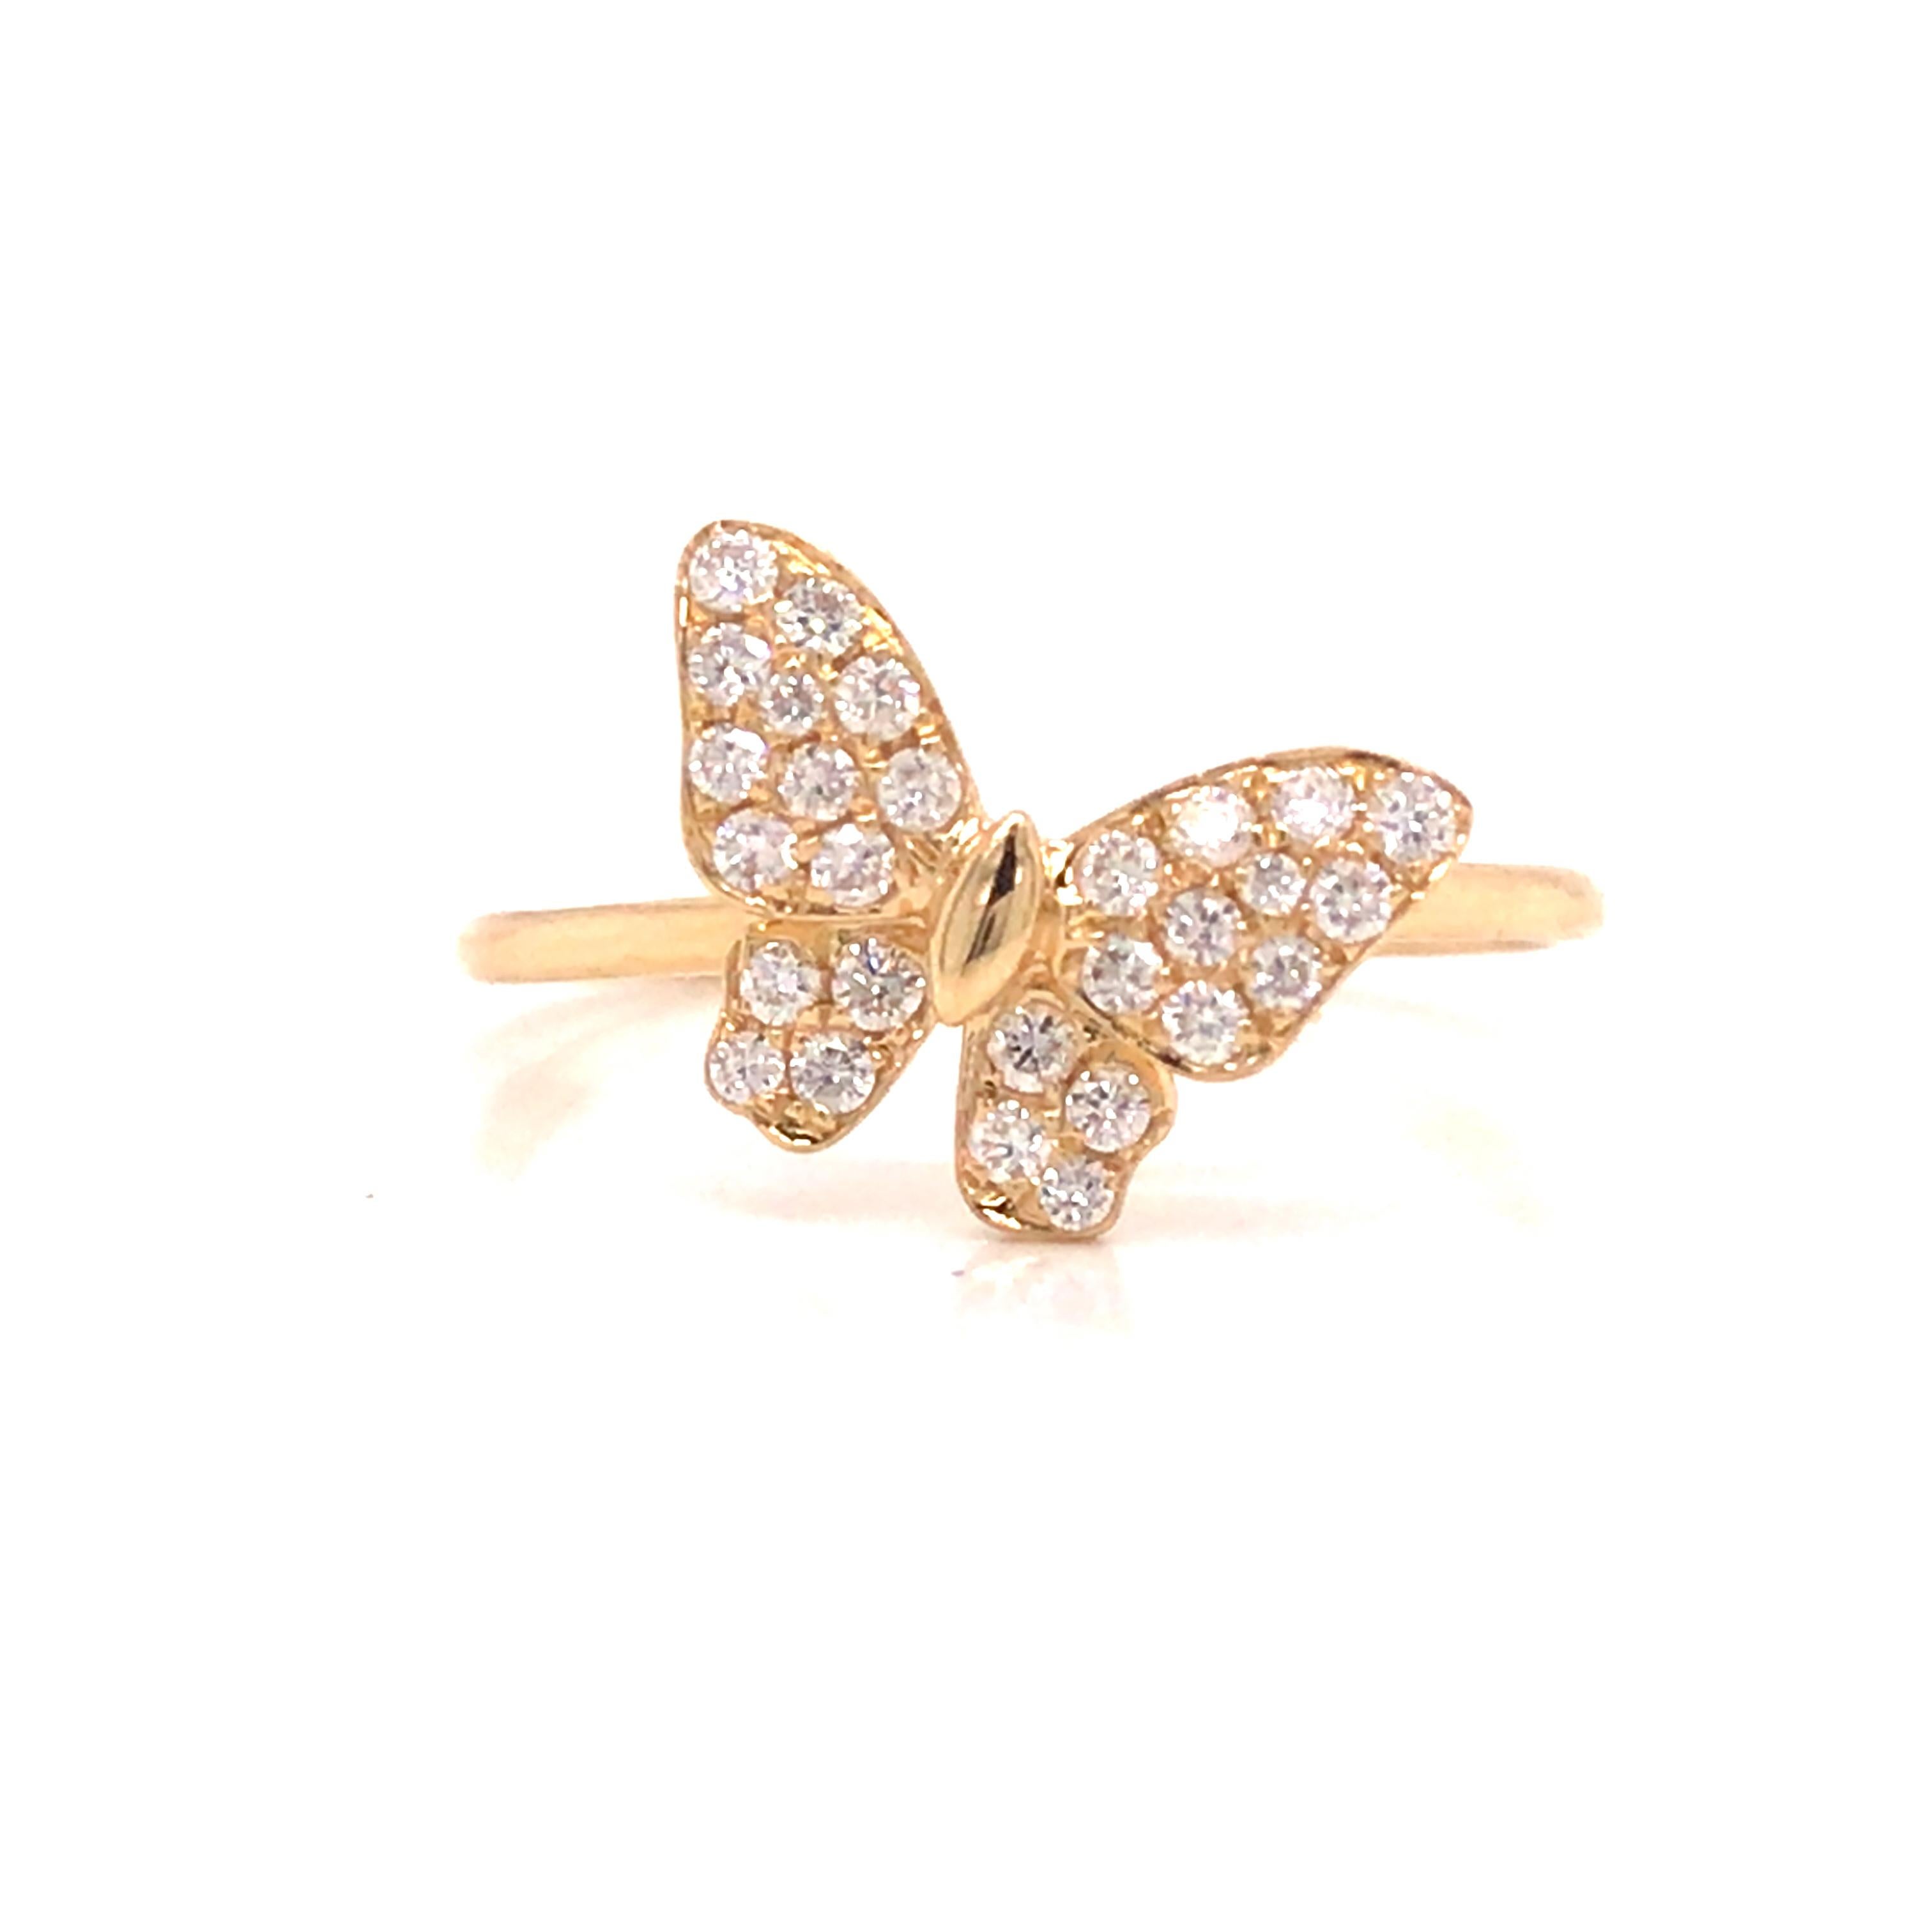 Diamond Pave Butterfly Ring in 18K Yellow Gold.  (28) Round Brilliant Cut Diamonds weighing 0.25 carat total weight, G-H in color and VS-SI in clarity are expertly set.  The Ring measures 3/8 inch in length and 1/2 inch in width.  Ring size 6.  1.86